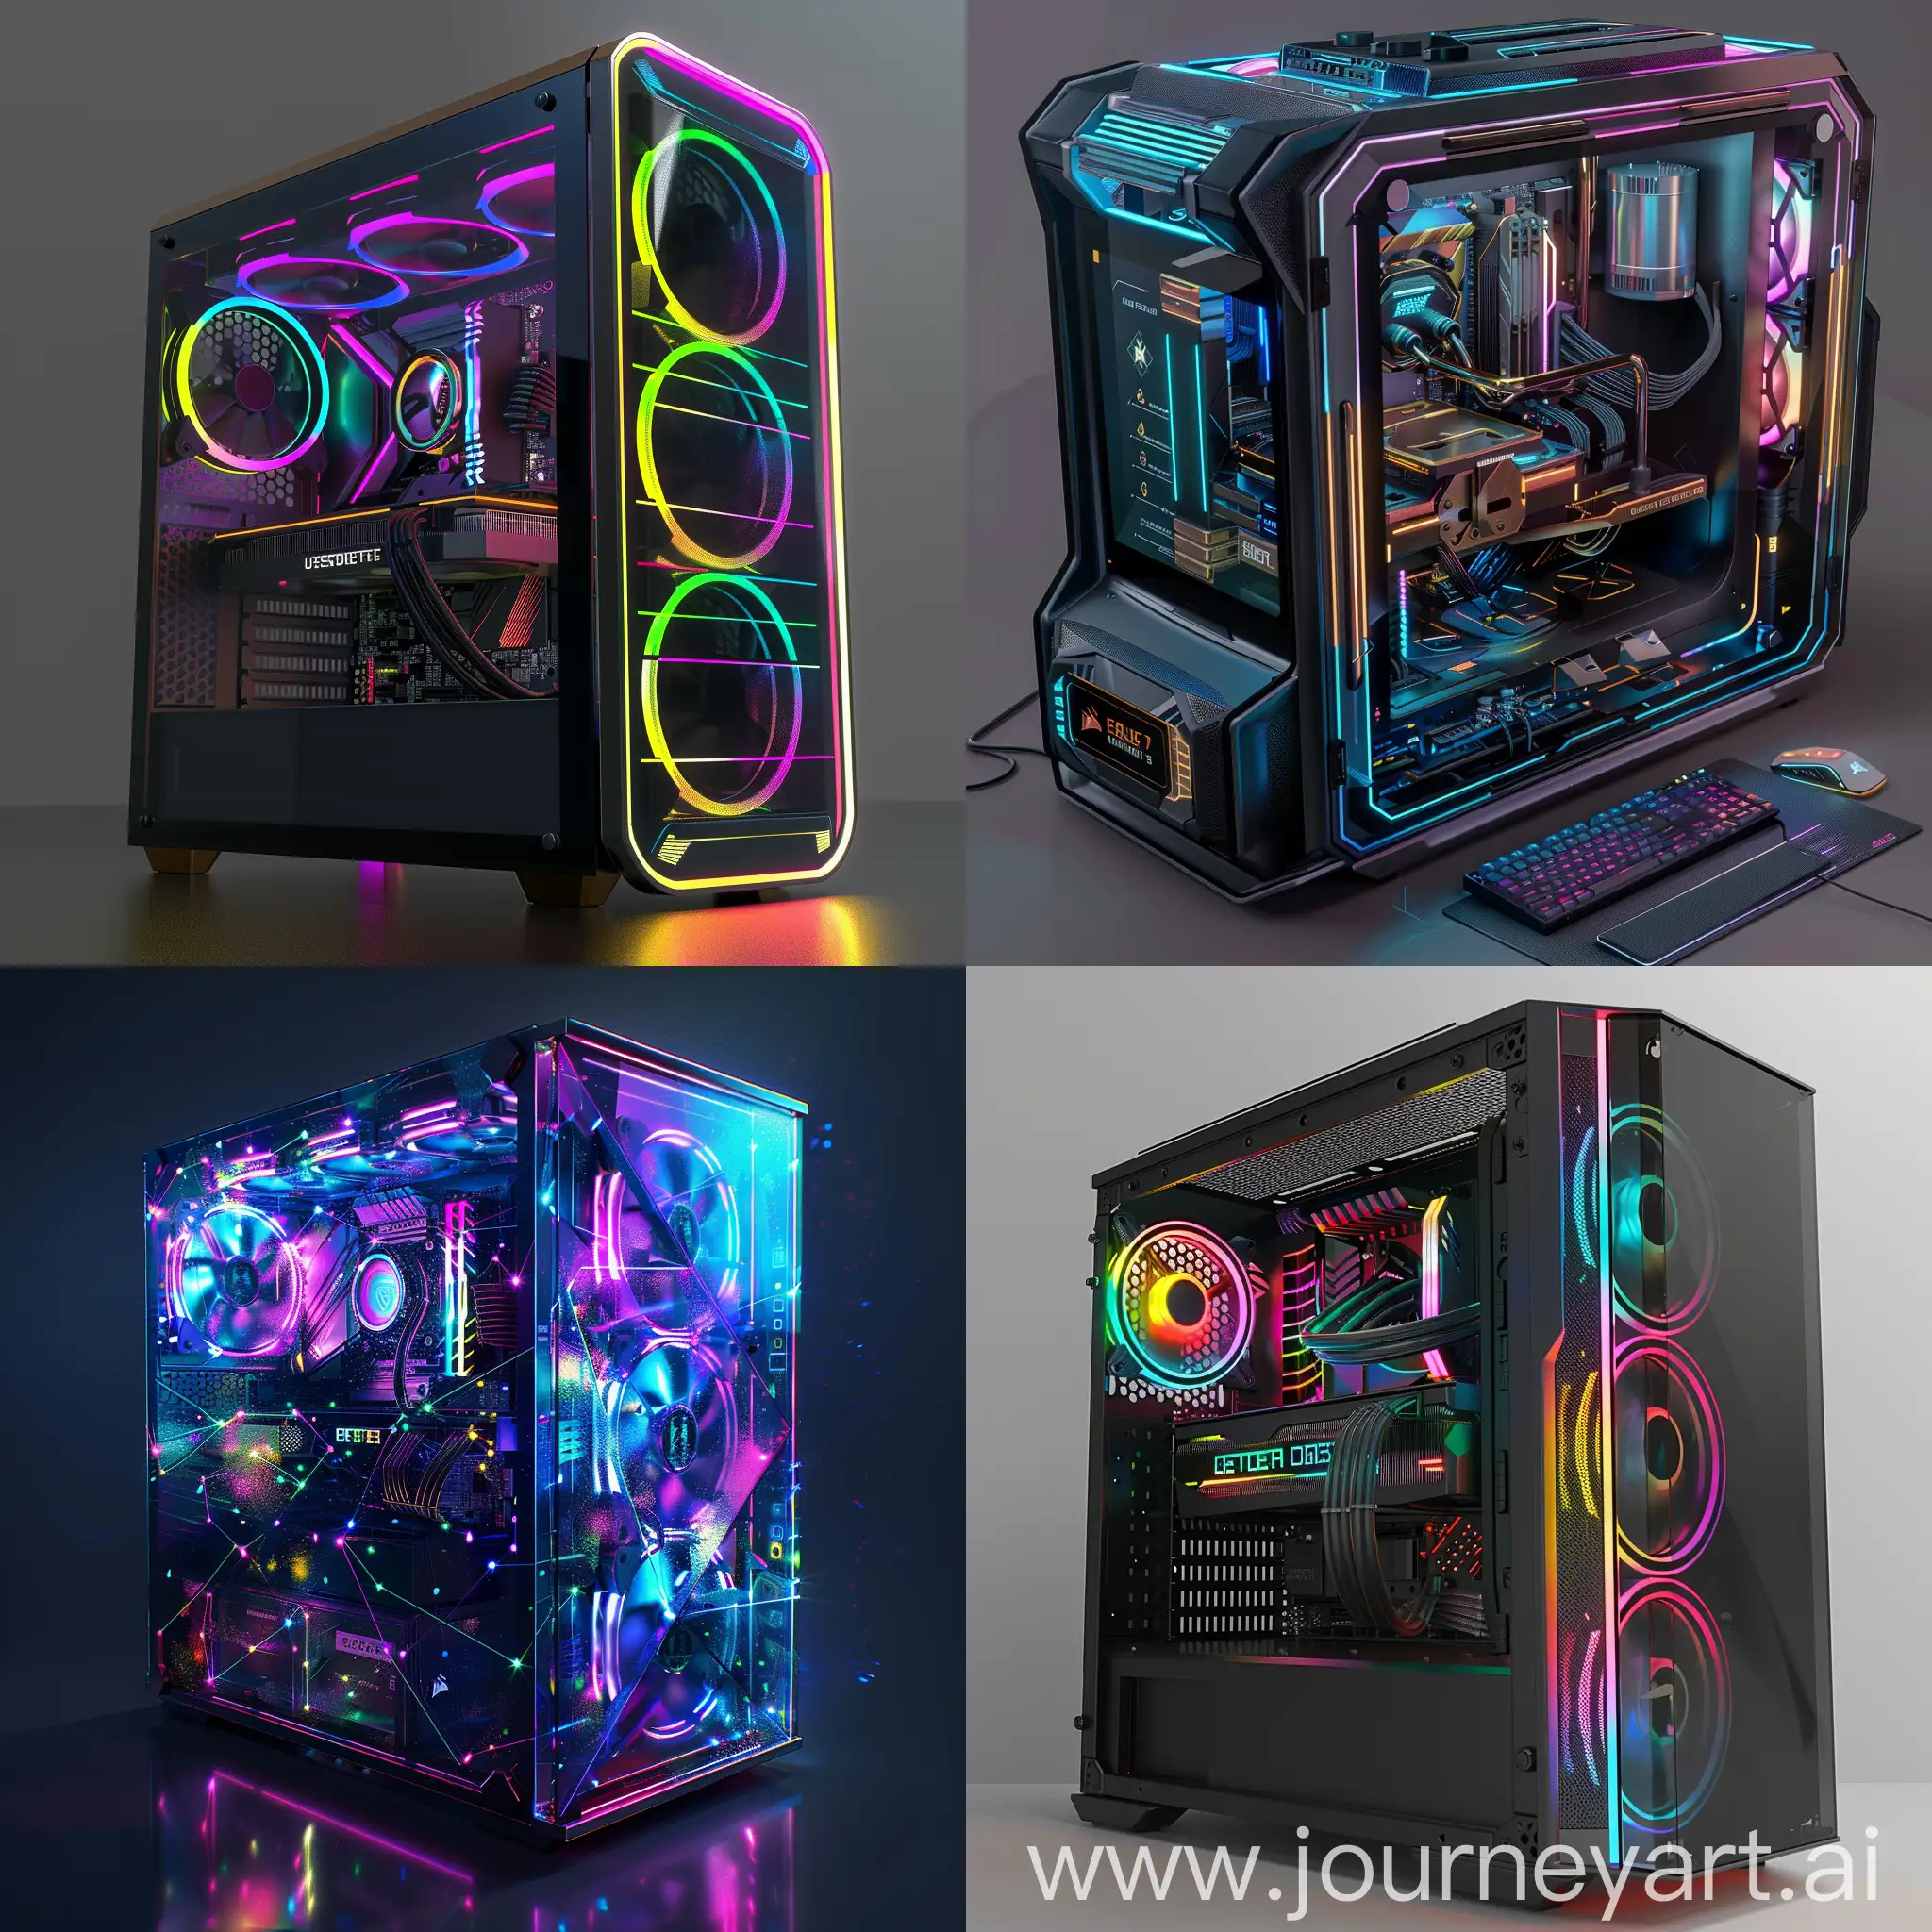 High-tech futuristic PC case, Modular Design, Integrated RGB Lighting, Wireless Connectivity, Smart Cooling System, AI Integration, Liquid Cooling Solutions, Eco-friendly Materials, Enhanced Cable Management, Augmented Reality Interfaces, Secure Biometric Access, Sleek Minimalist Design, Tempered Glass Panels, Customizable RGB Lighting, Integrated Touchscreen Display, Wireless Charging Pad, Hidden Connectivity Ports, Modular Exterior Panels, Dynamic LED Patterns, Built-in Sound System, Smart Assistant Integration. unreal engine 5 --stylize 1000